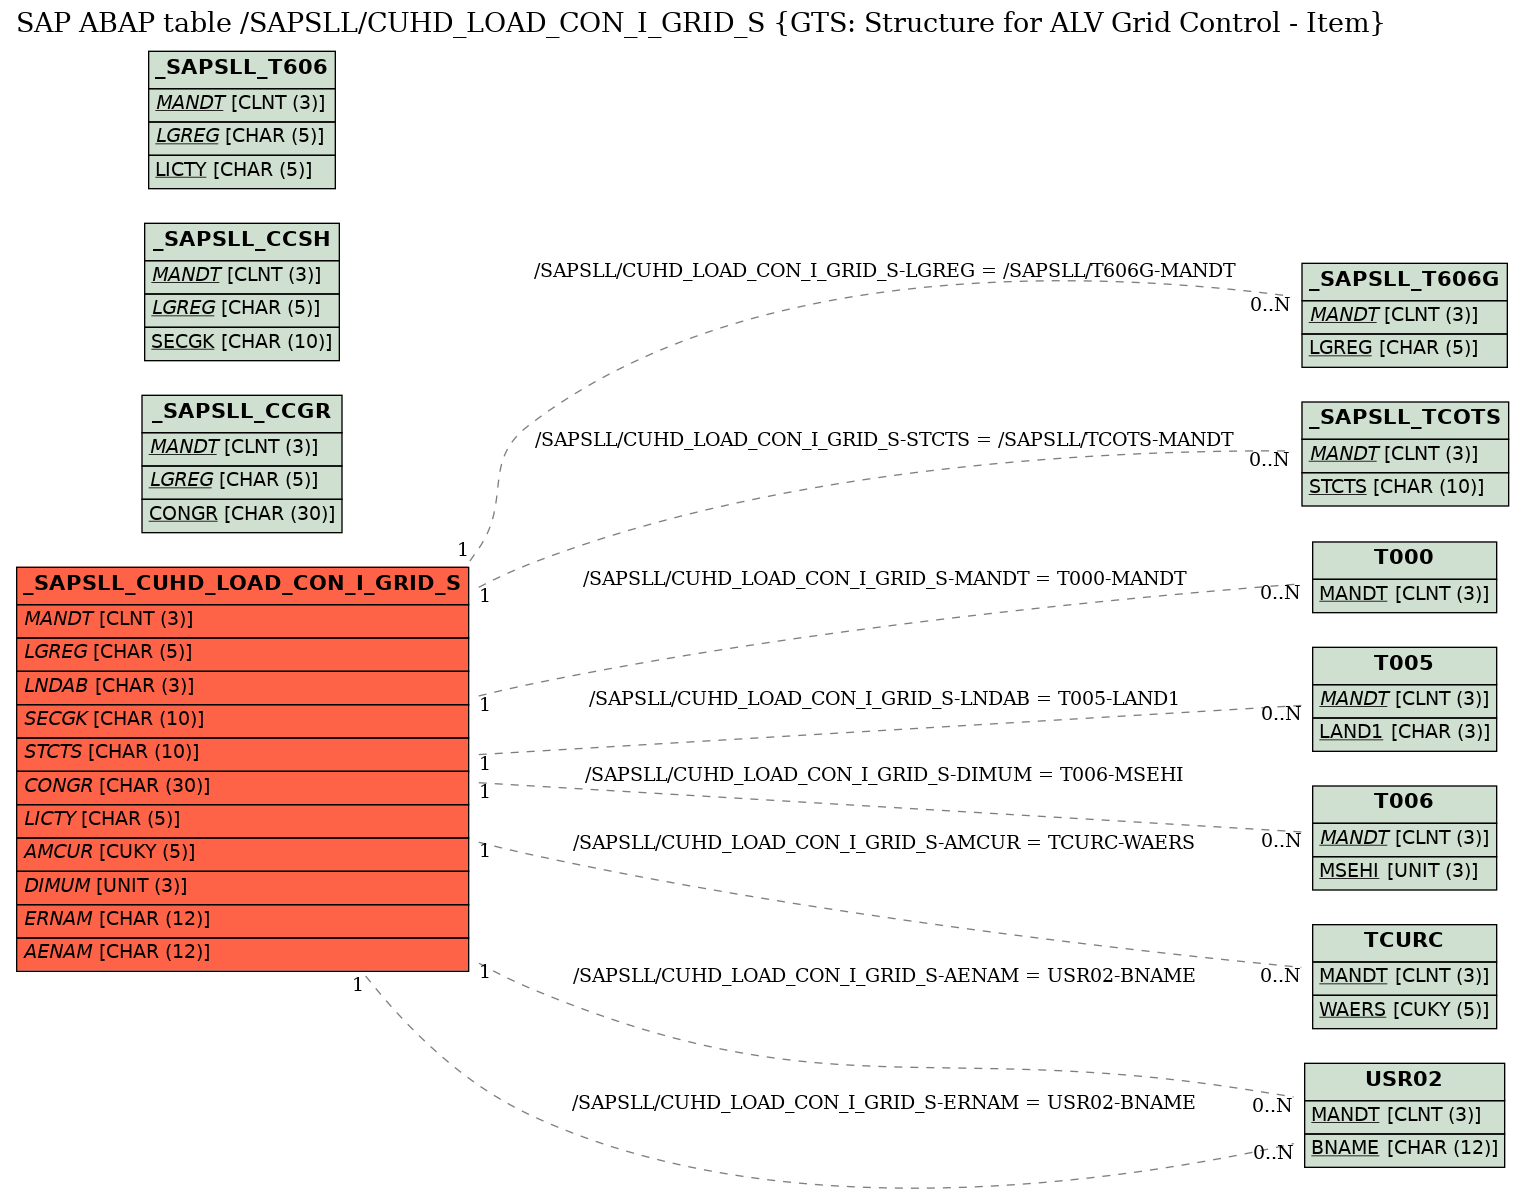 E-R Diagram for table /SAPSLL/CUHD_LOAD_CON_I_GRID_S (GTS: Structure for ALV Grid Control - Item)